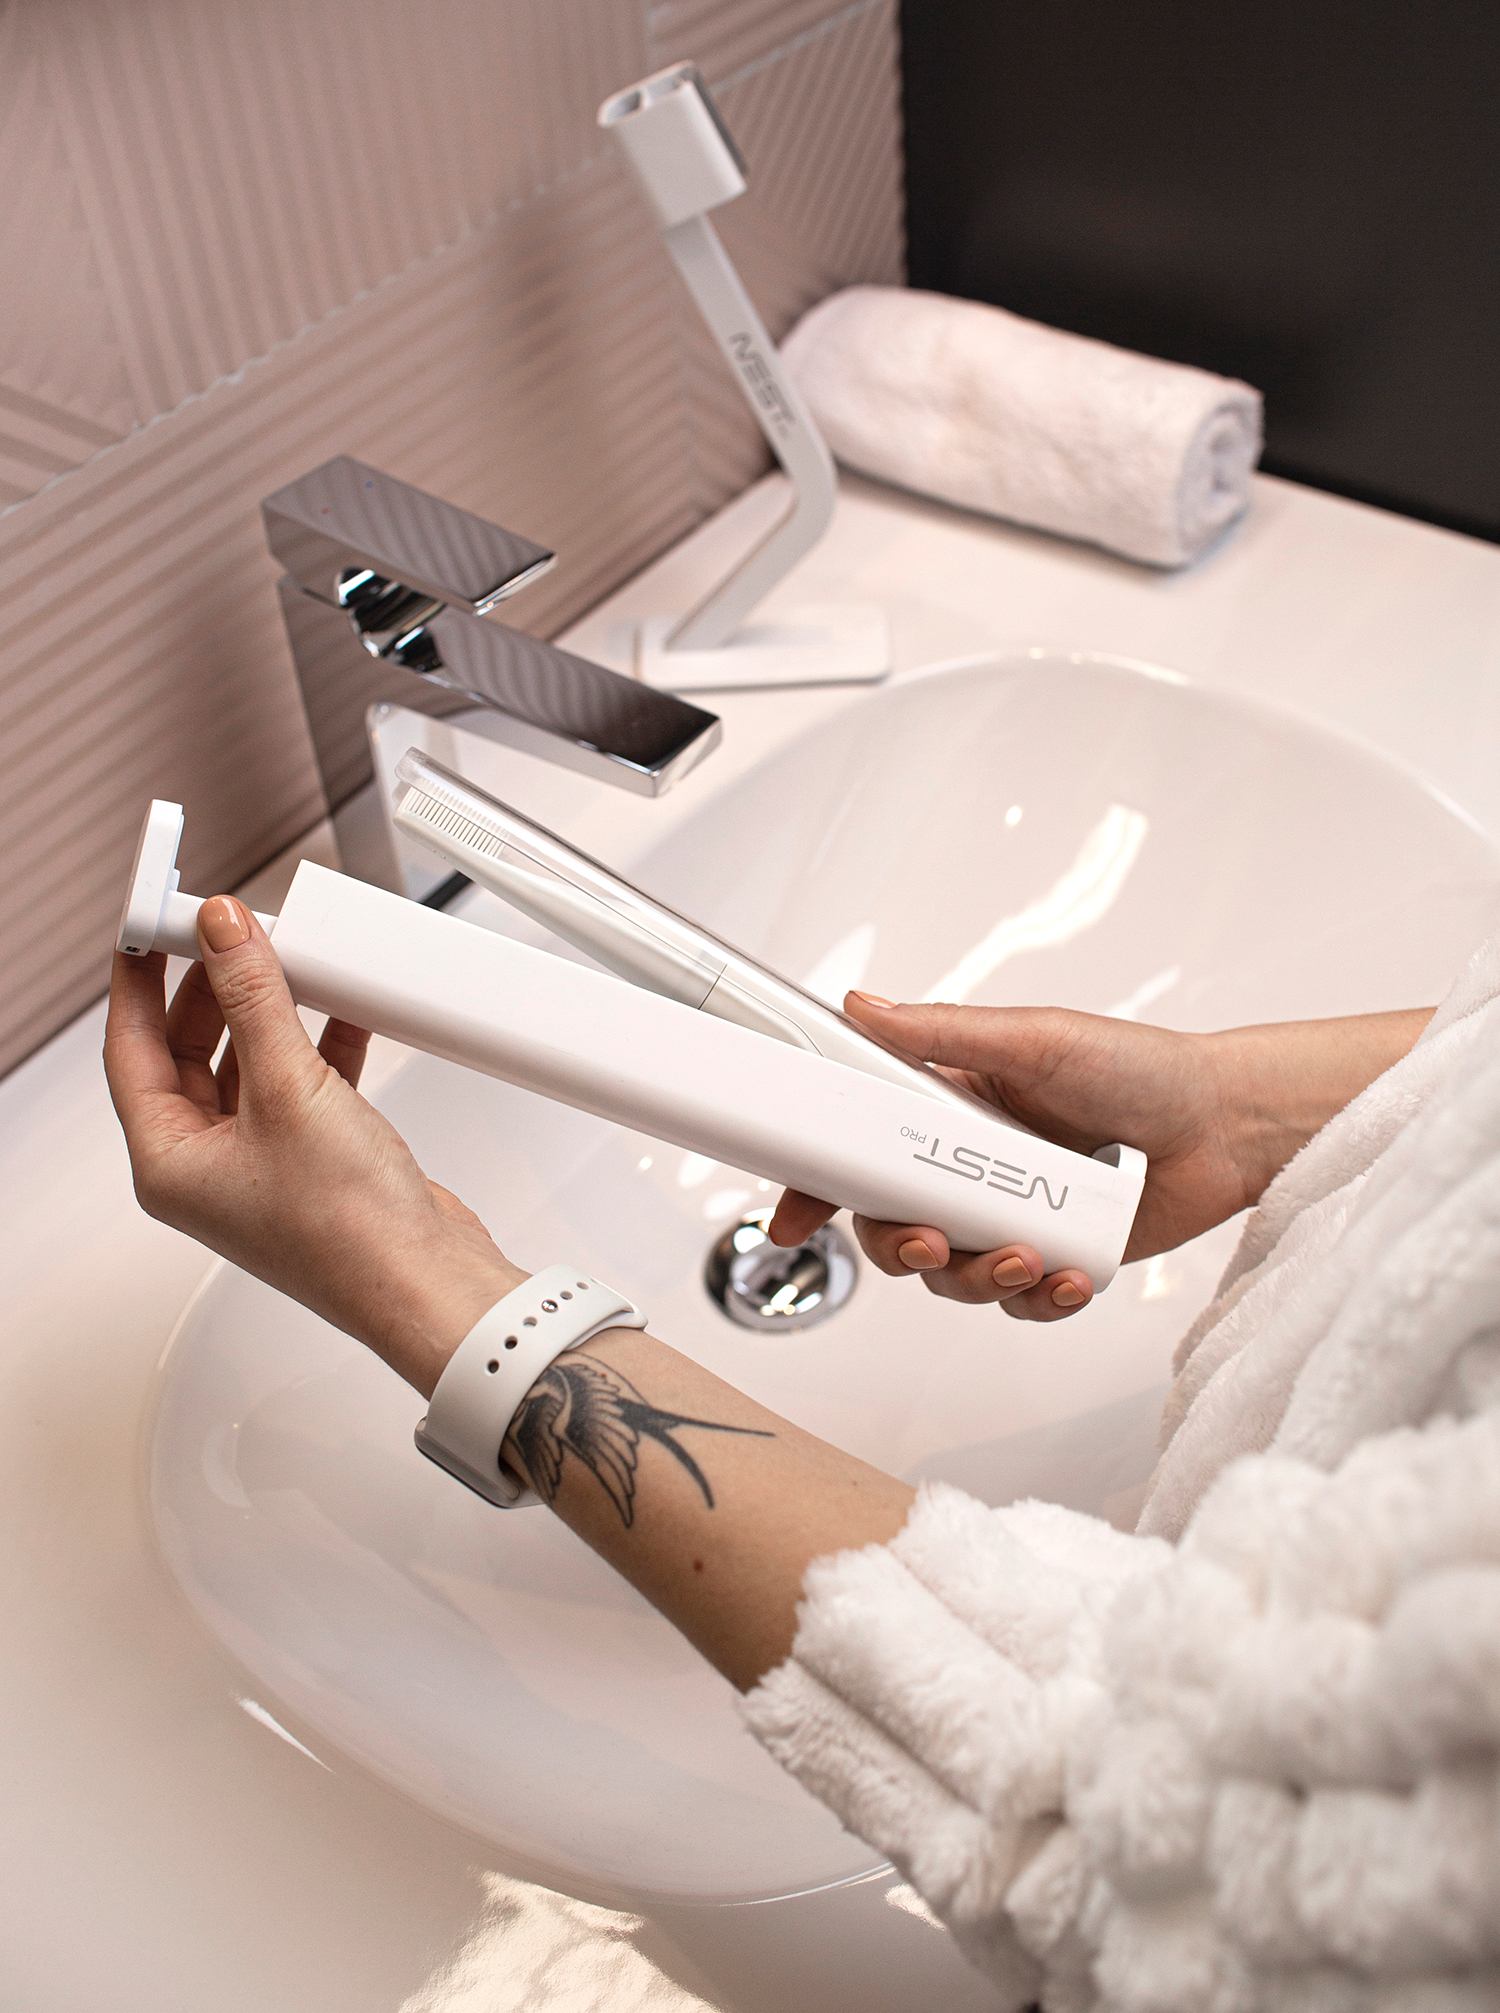 Nest Care Introduces Refillable Self-Dispensing Toothbrush